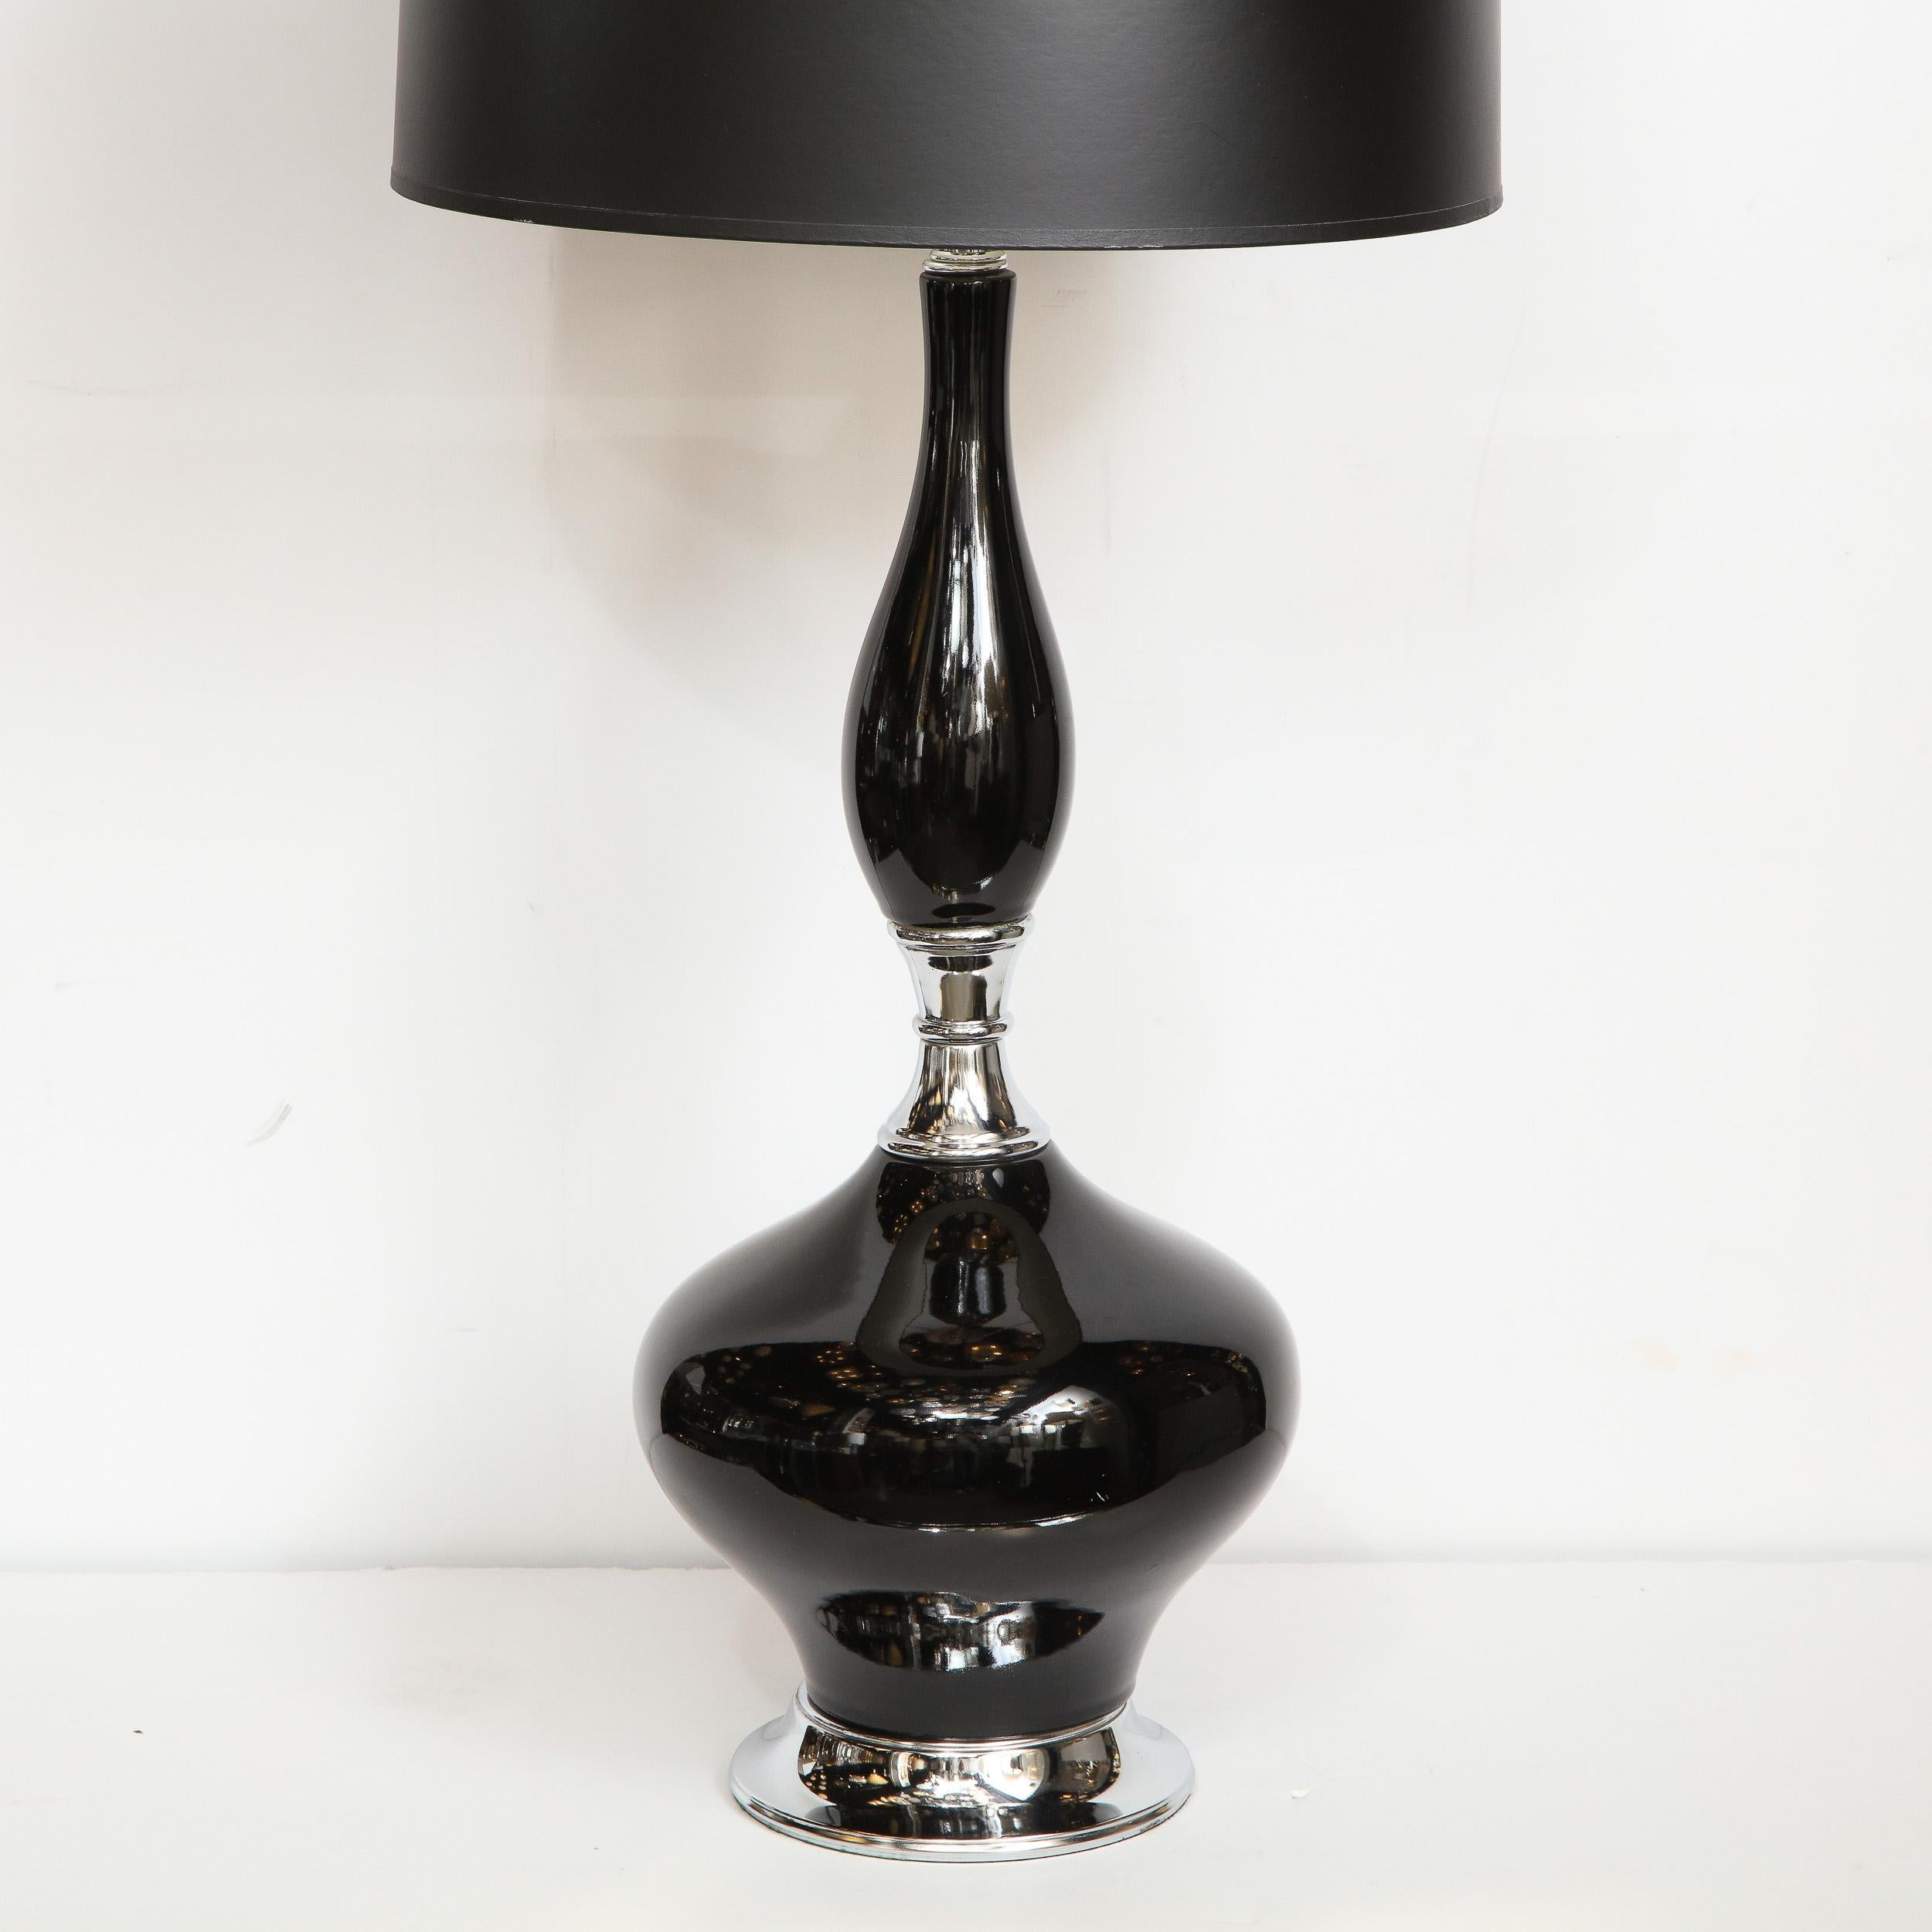 This beautiful Mid-Century Modern ceramic lamp was realized in the United States, circa 1960. It features an organic protuberant form finished in a lustrous black glaze that extends upwards from a chrome base. Elegant, whimsical and dramatic, this